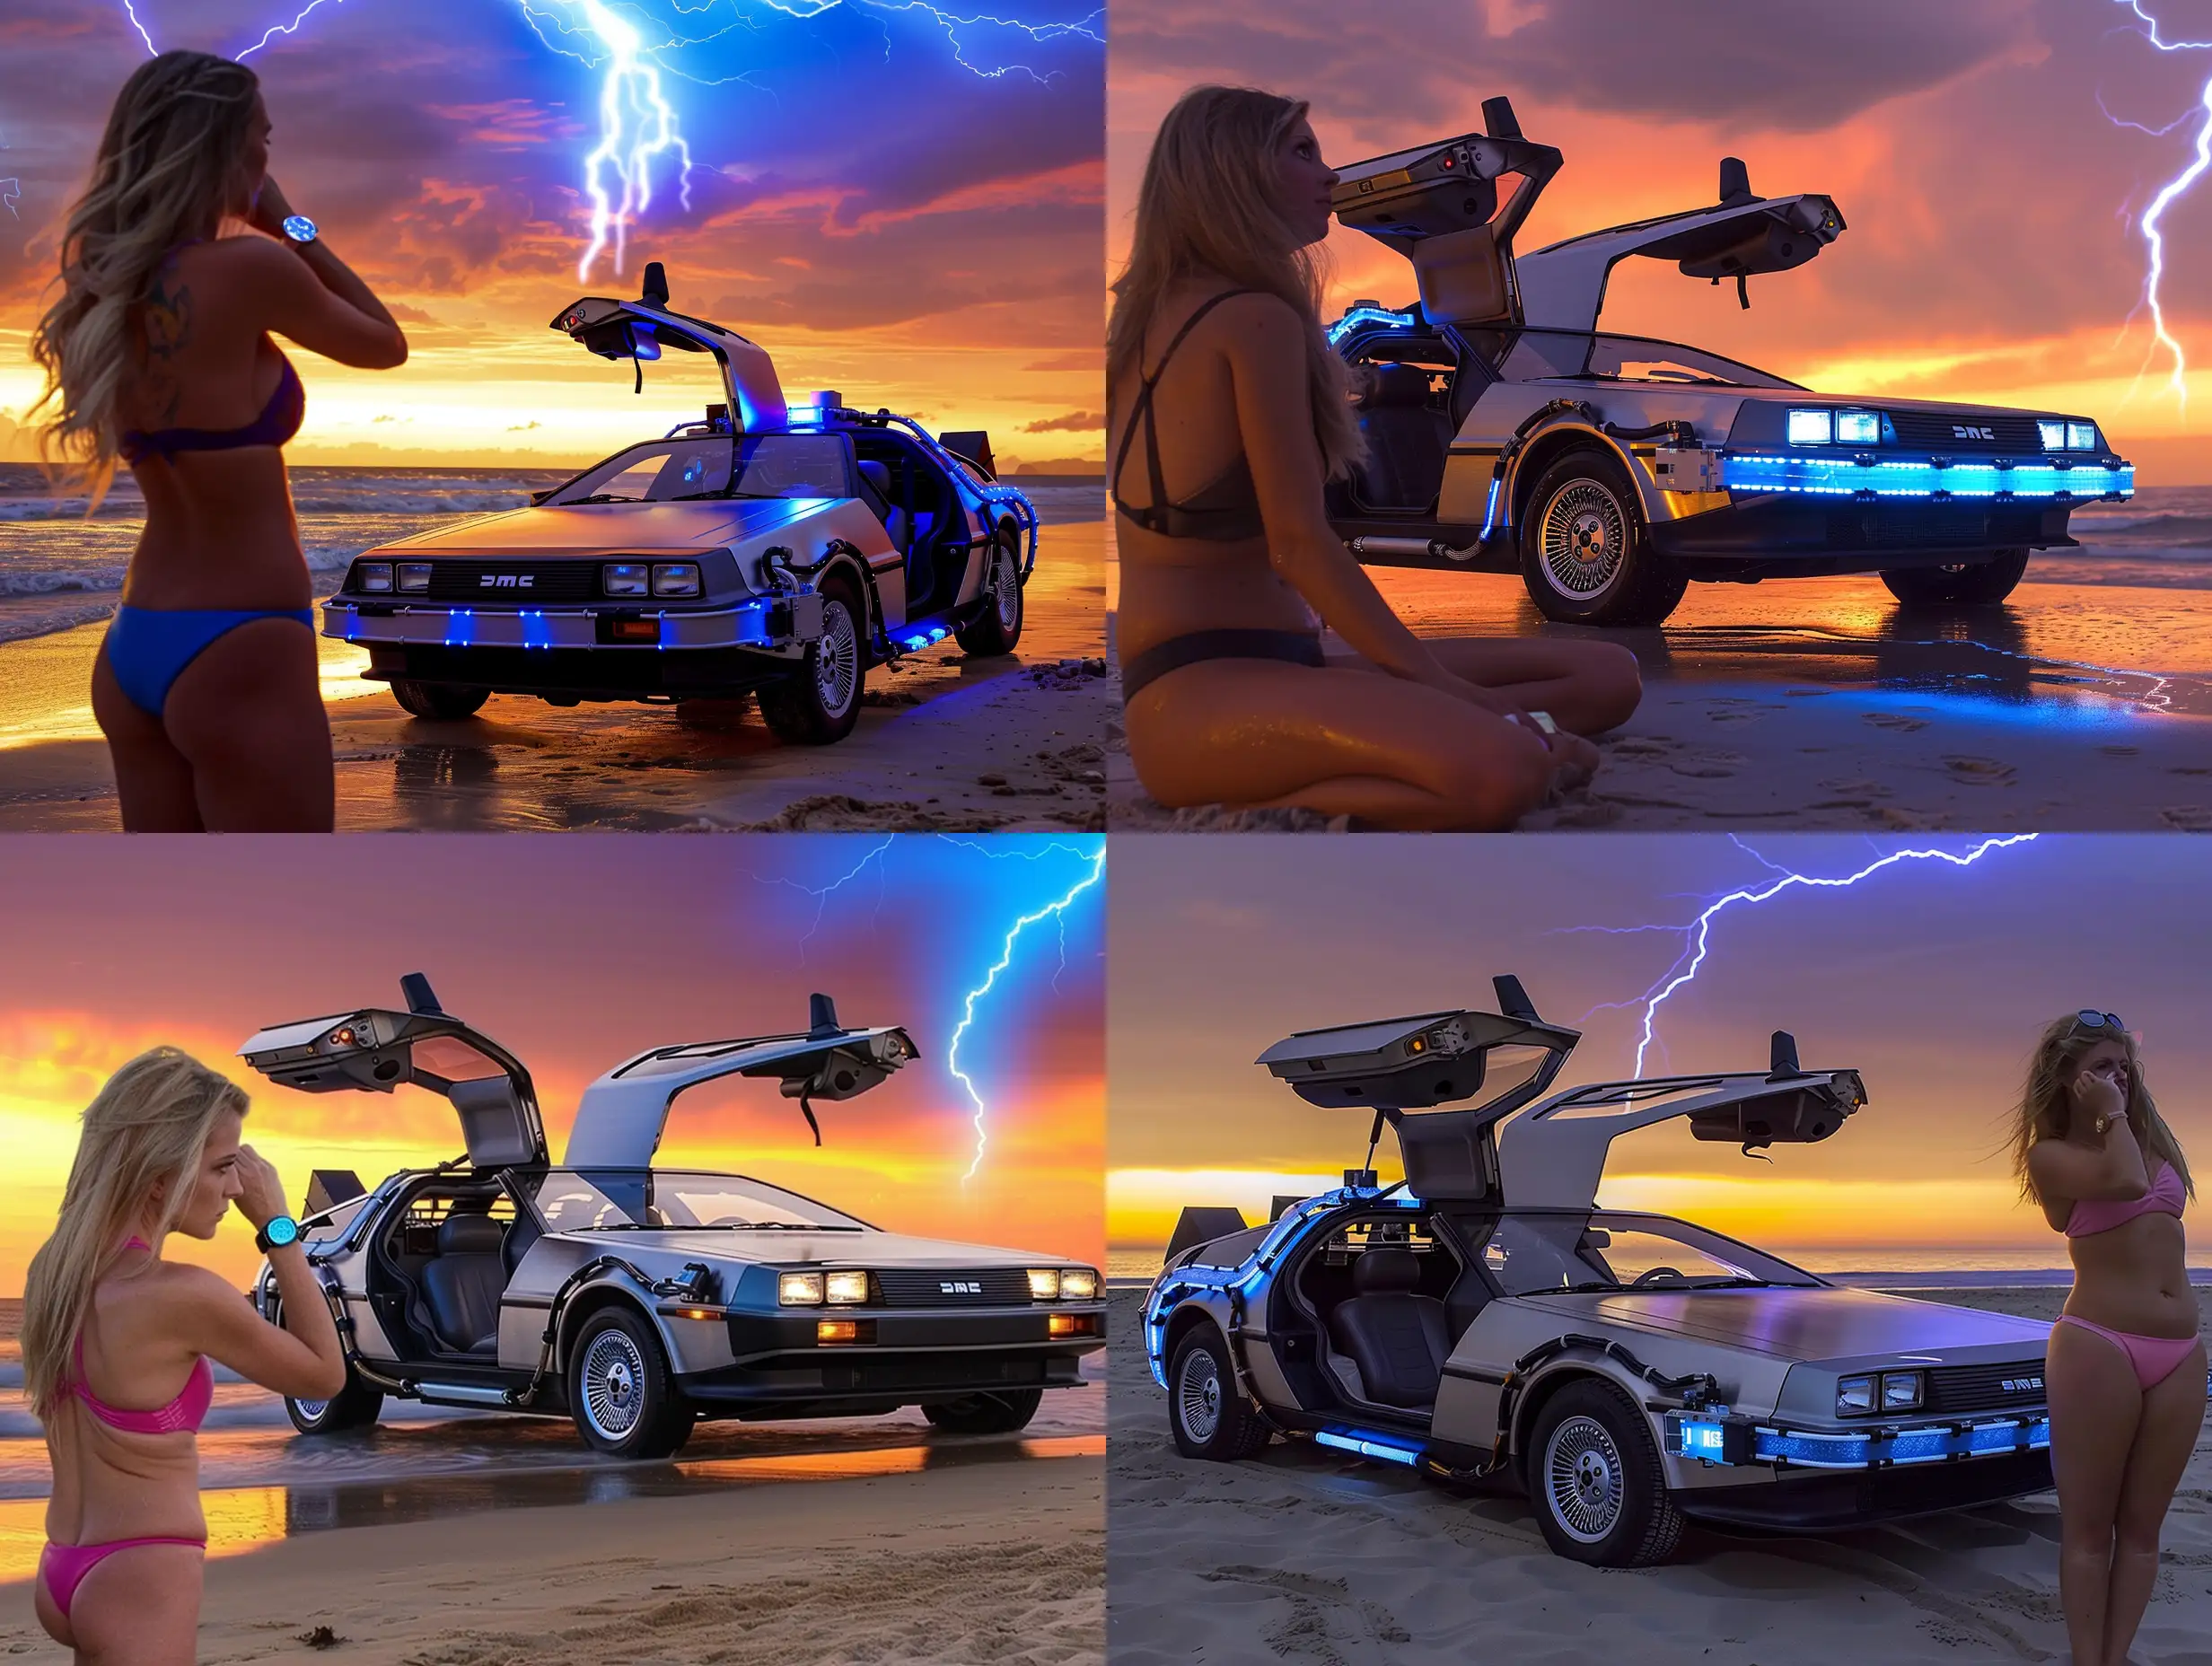 Delorean-Time-Machine-on-Beach-Vibrant-Sunset-Scene-with-Blue-Lightning-and-Blonde-Woman-in-Bikini-Checking-Watch